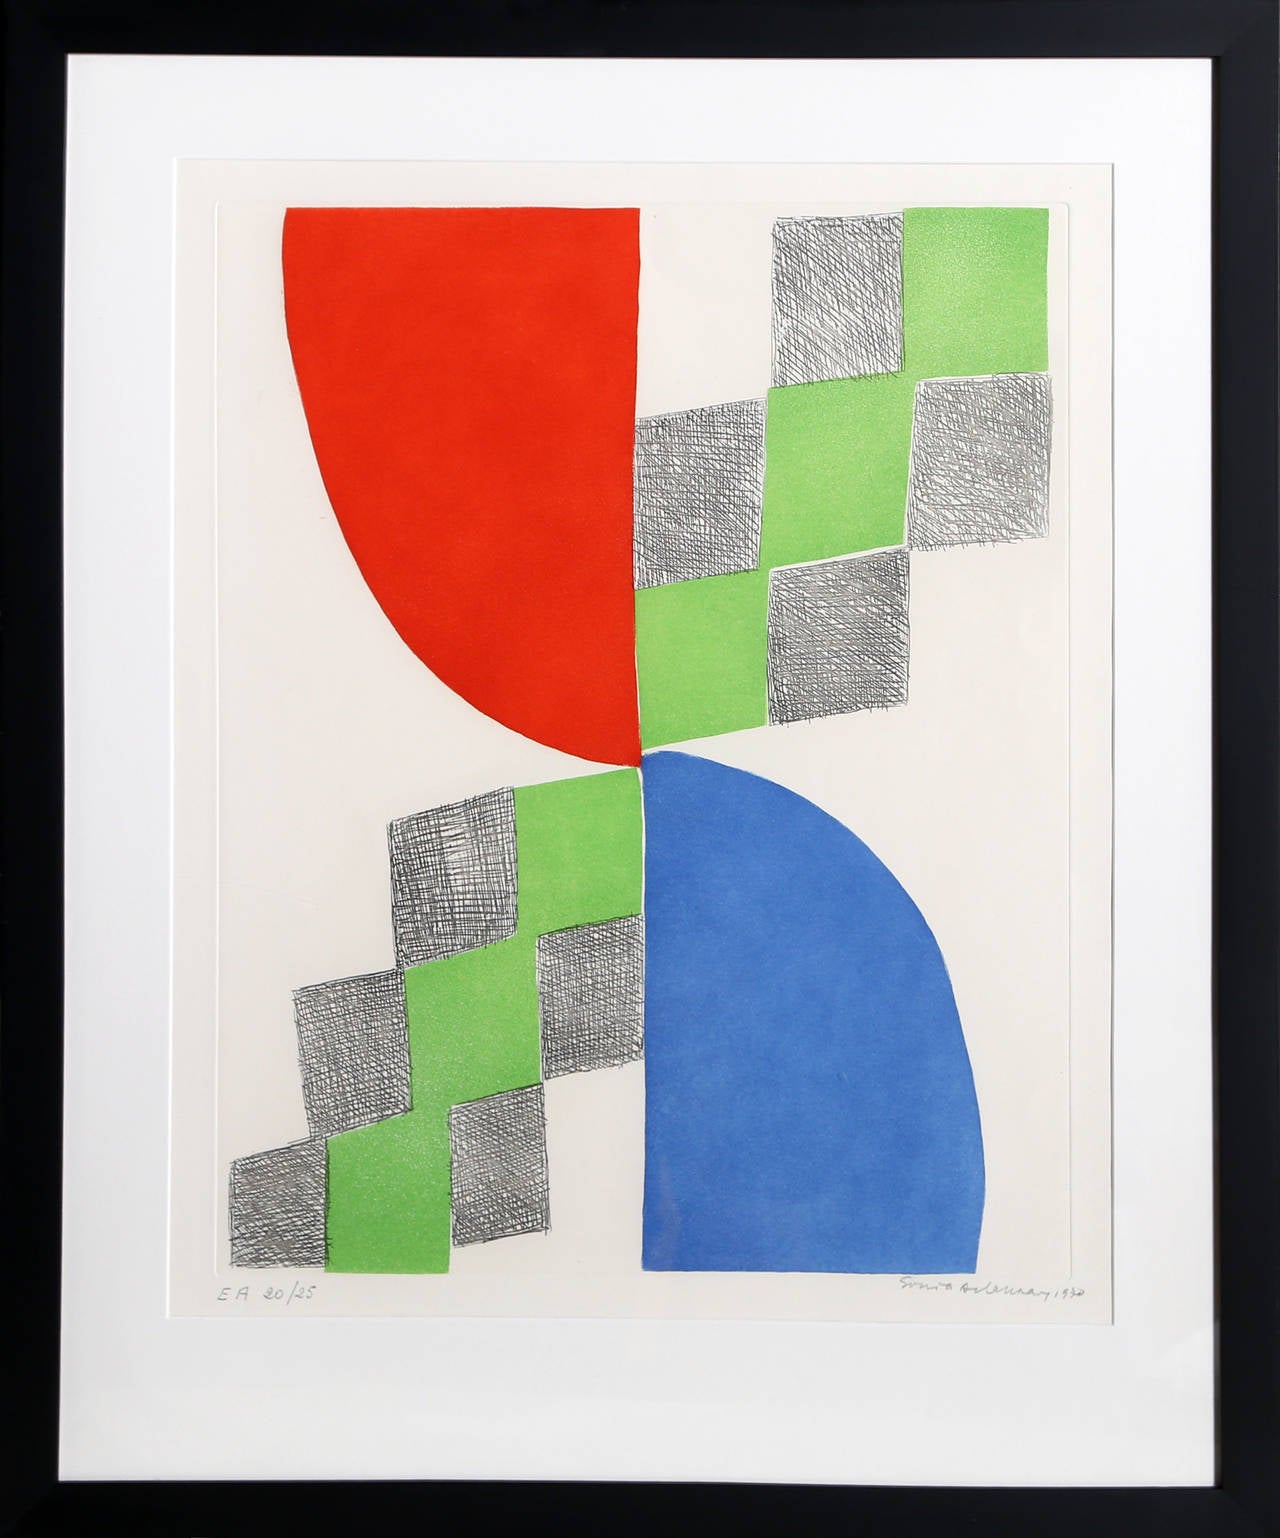 Artist: Sonia Delaunay, Ukrainian-French (1885 - 1979)
Title: Untitled
Year: 1970
Medium: Aquatint Etching, Signed and numbered in pencil
Edition: EA 20/25
Image Size: 20.5 x 16 inches
Size: 26  x 20 in. (66.04  x 50.8 cm)
Frame Size: 29.5 x